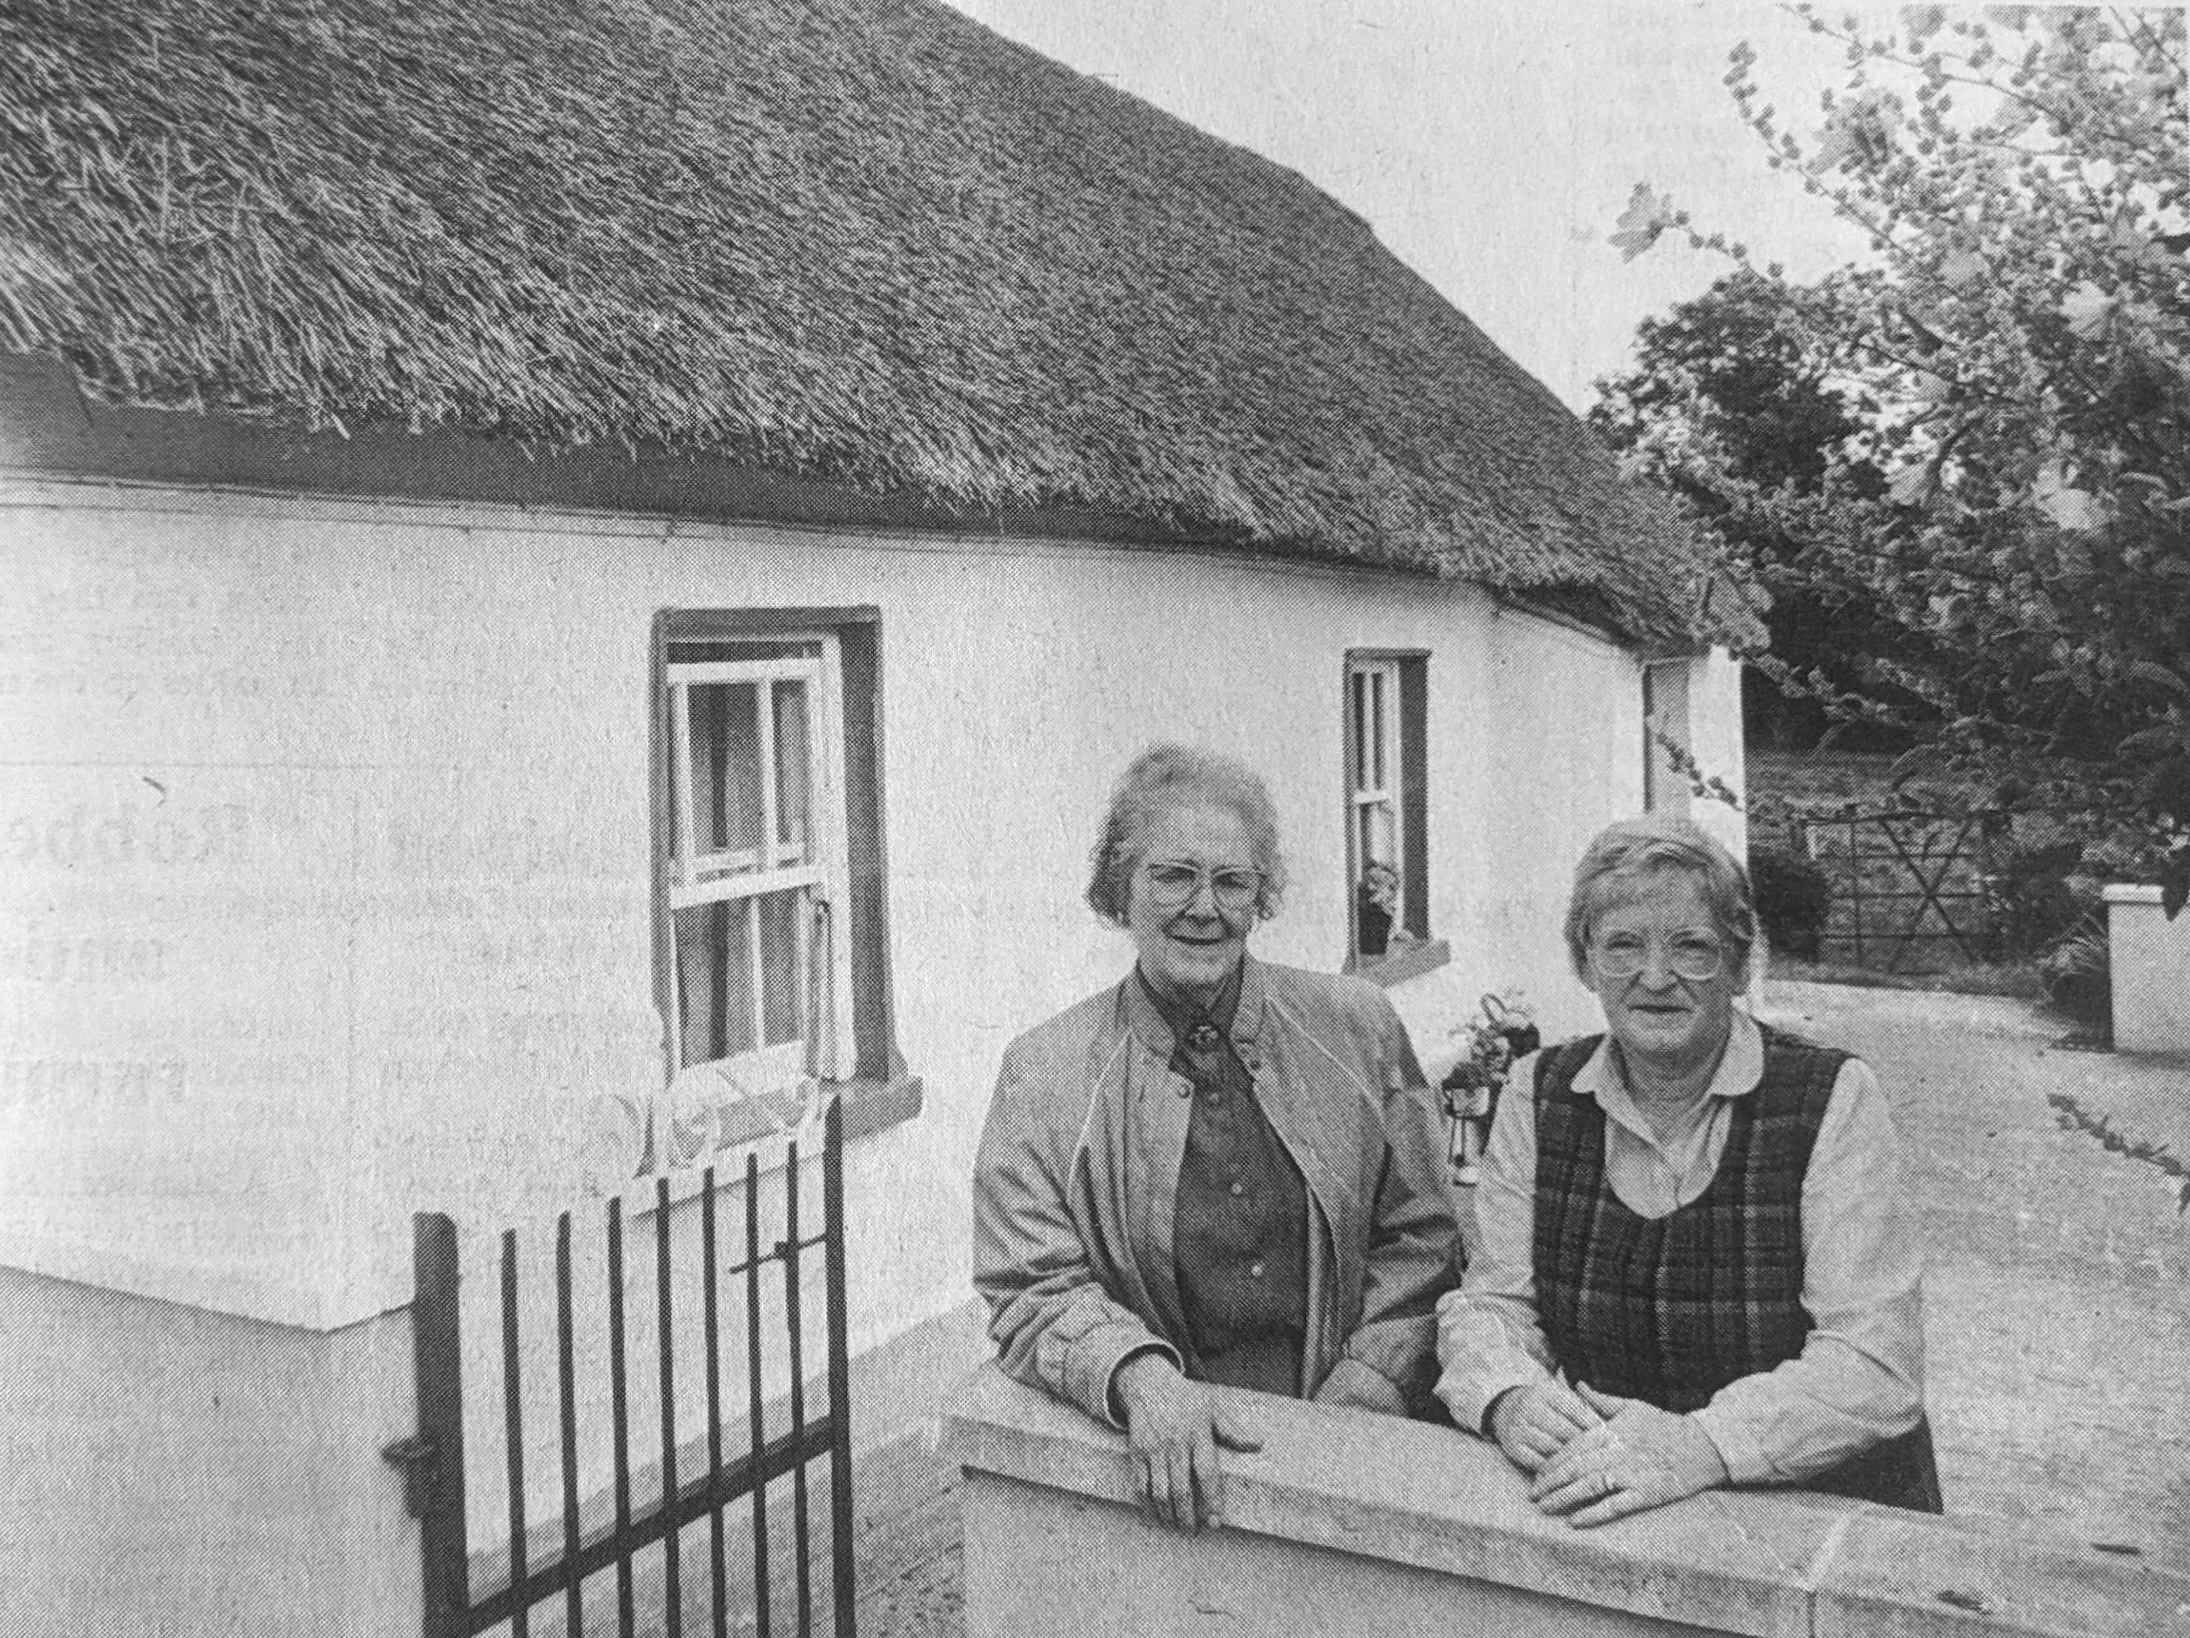 Fermanagh in 1991: Derrykerrib’s past celebrated